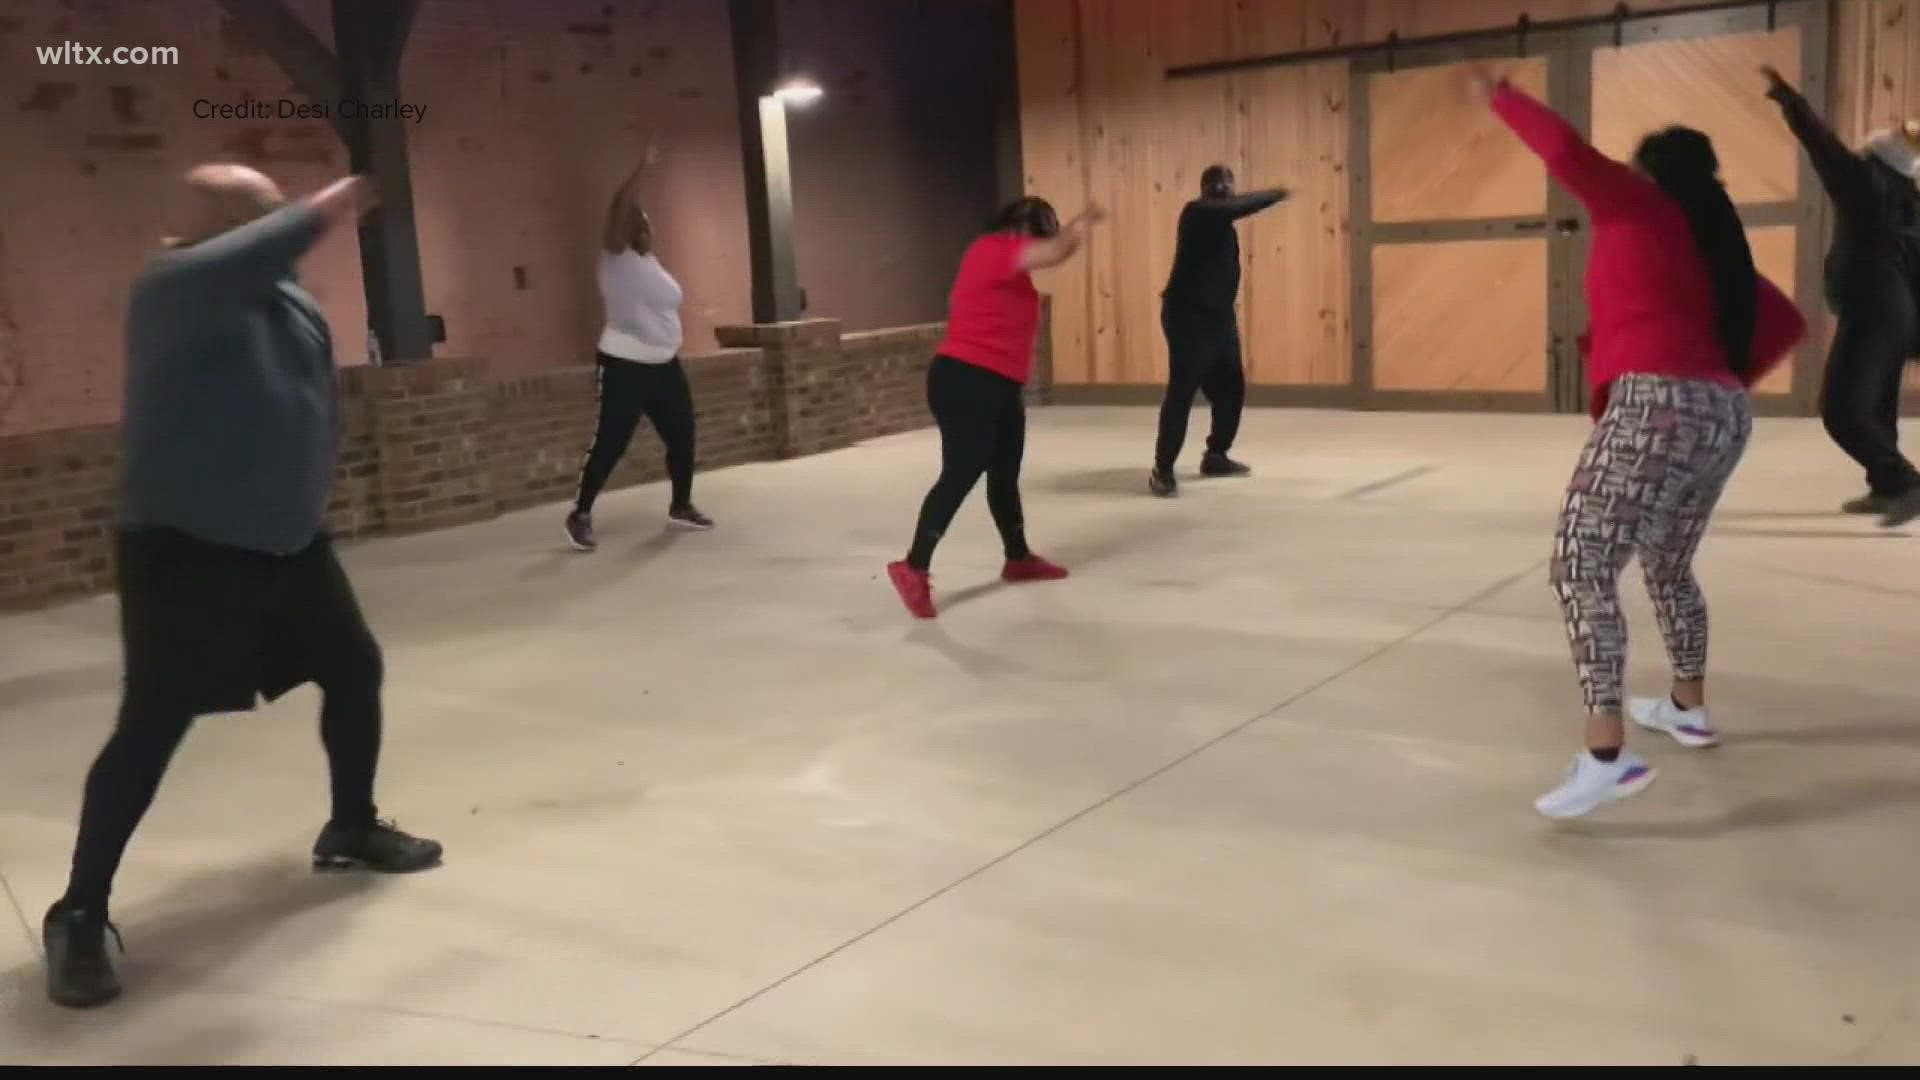 In October, Desi Charley and her husband Jabari started offering free weekly group fitness classes every Monday at the downtown Orangeburg Pavilion.